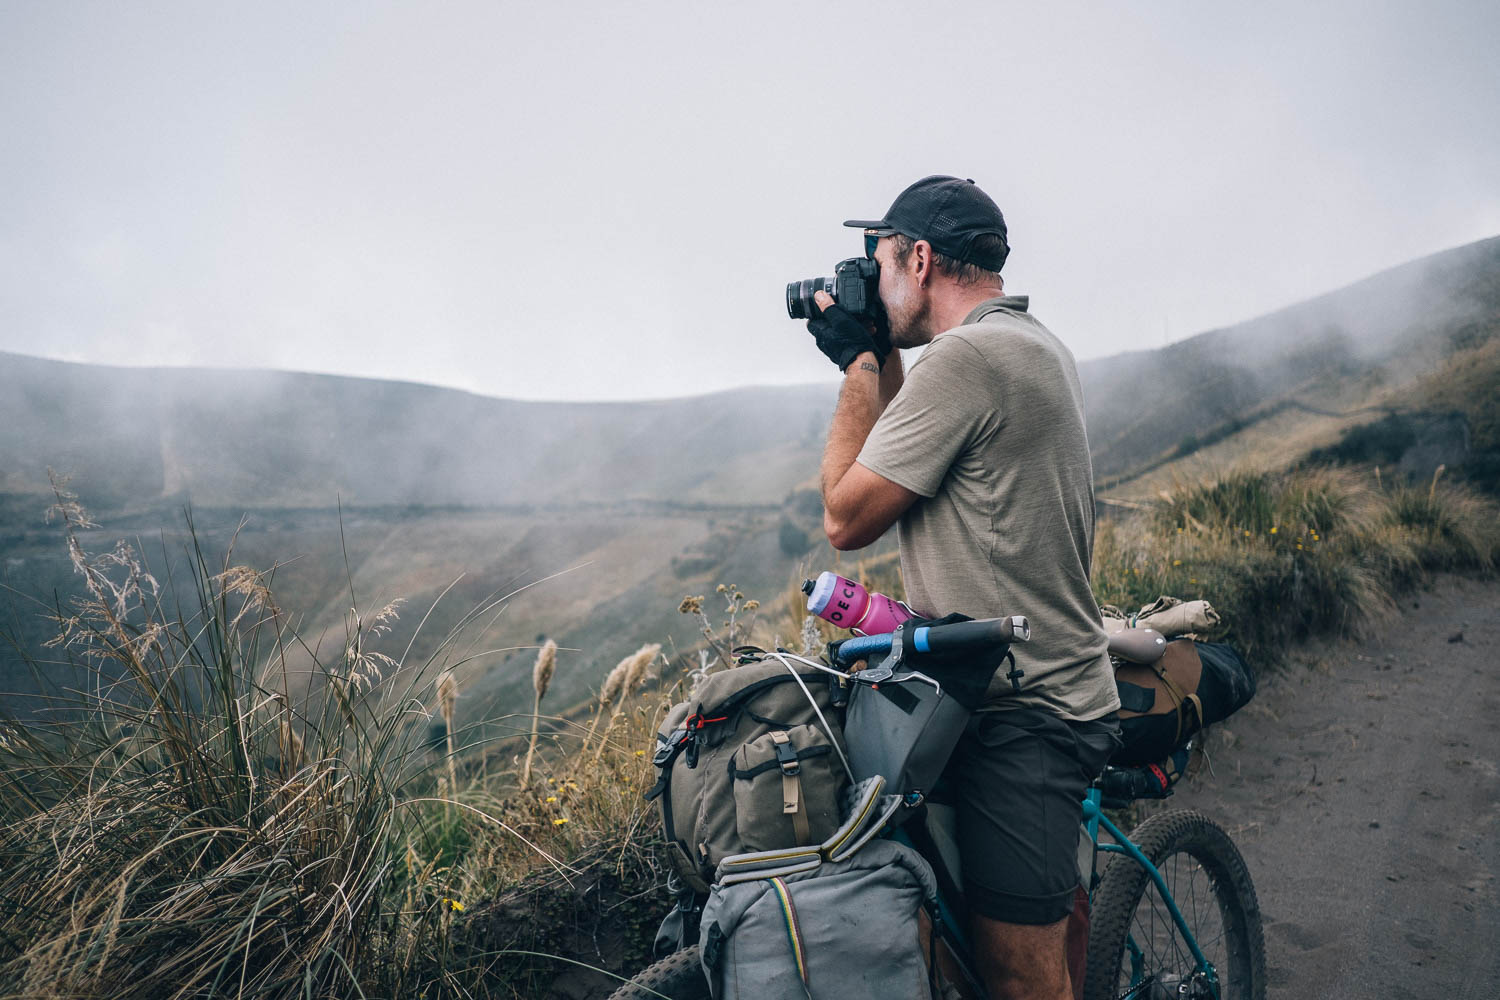 Carrying a camera on your bike, touring